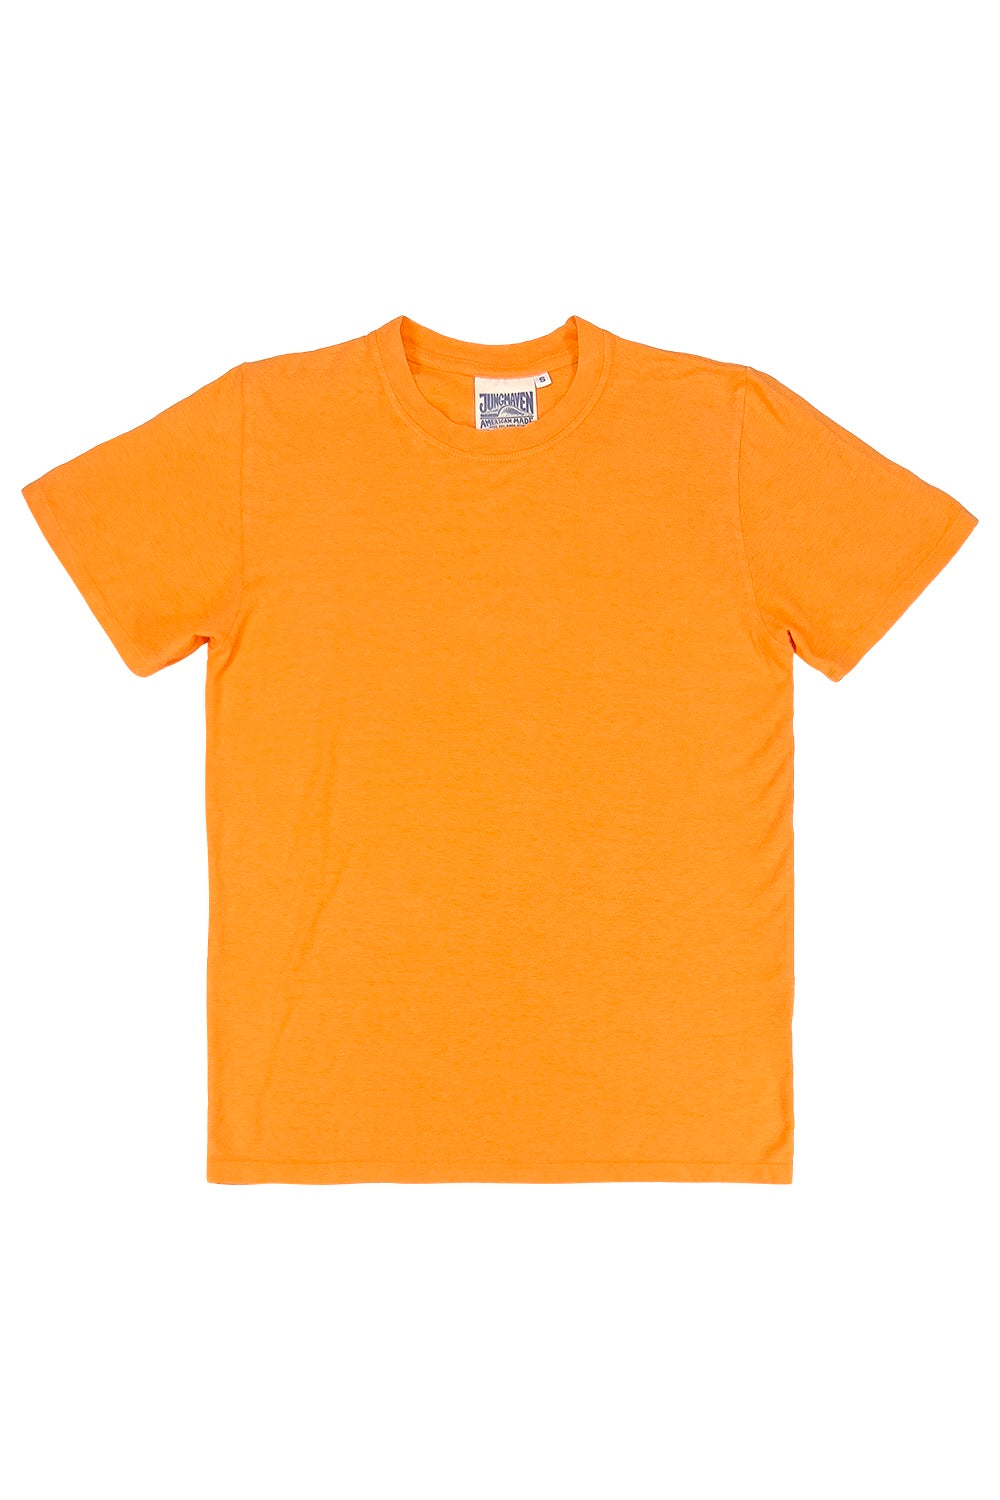 Jung Tee | Jungmaven Hemp Clothing & Accessories / Color: Apricot Crush